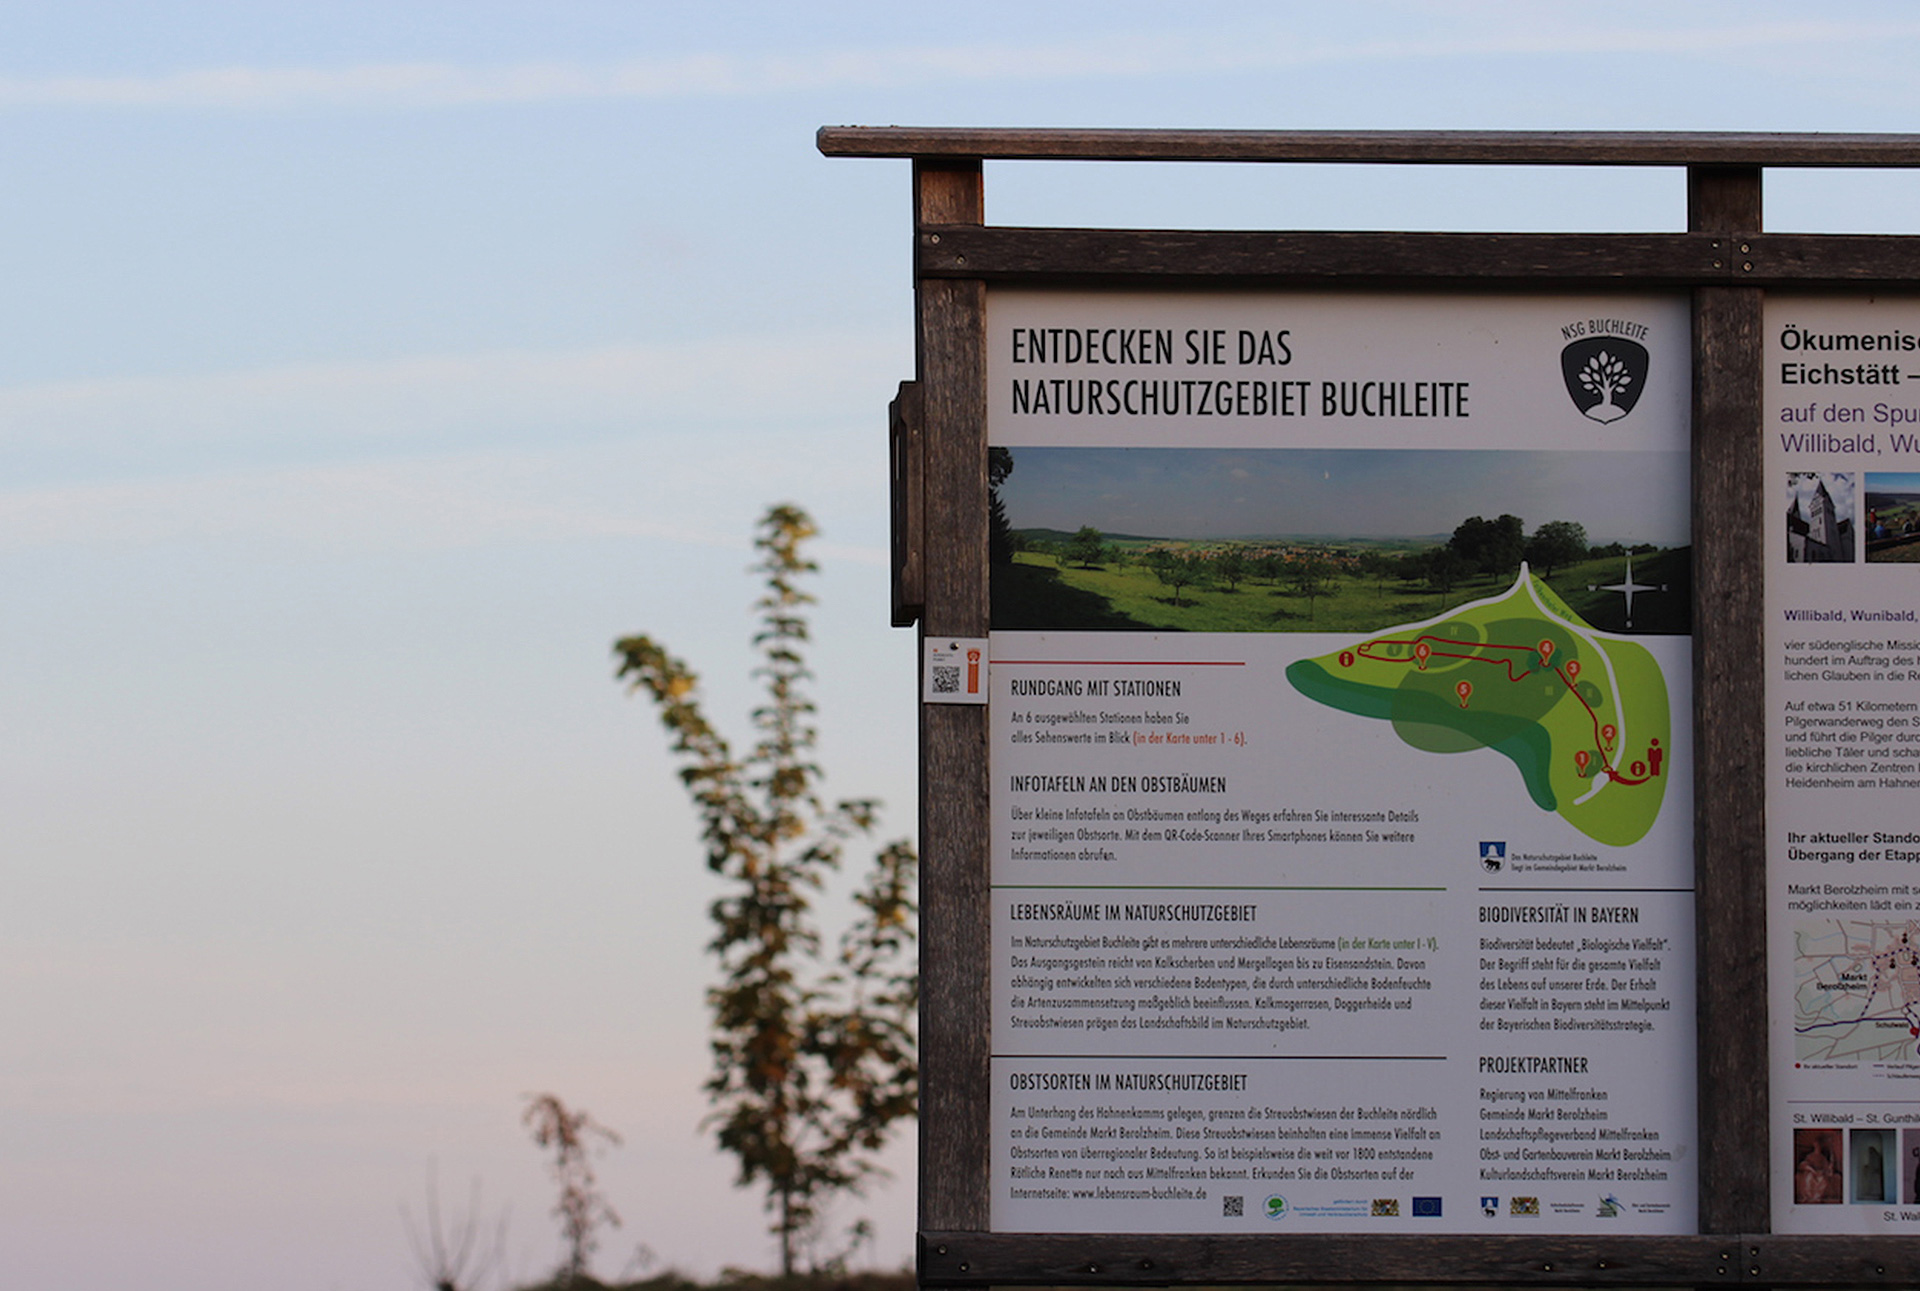 Information boards for nature trails